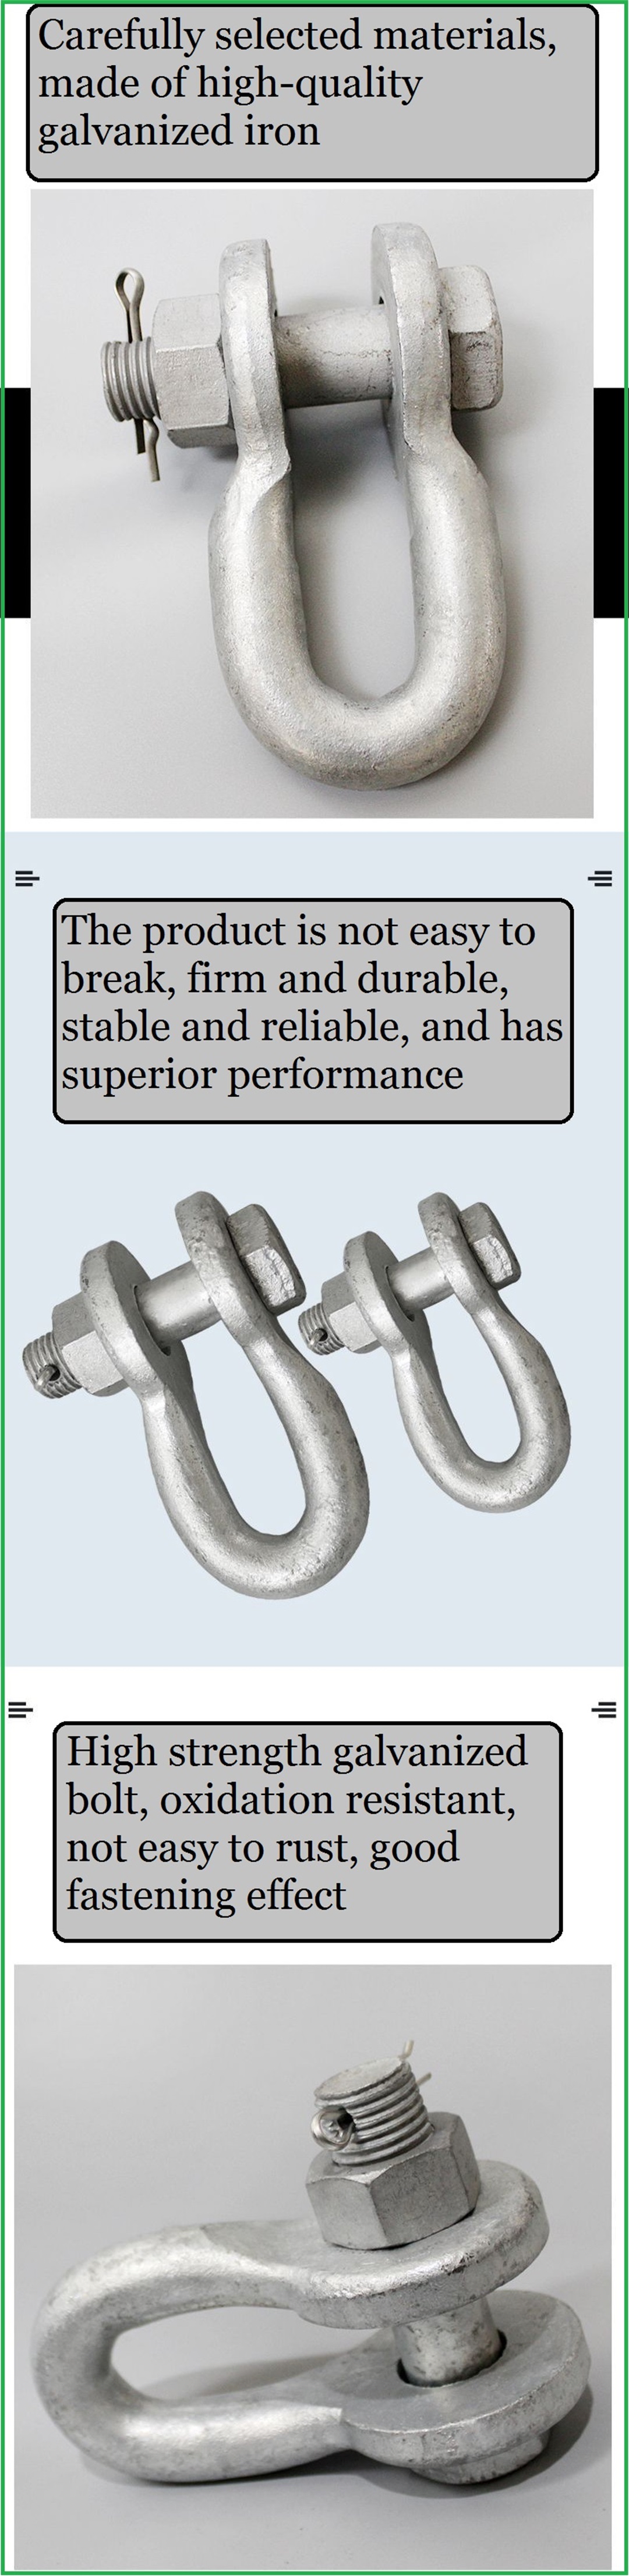 U shackle  Power link fittings for overhead lines